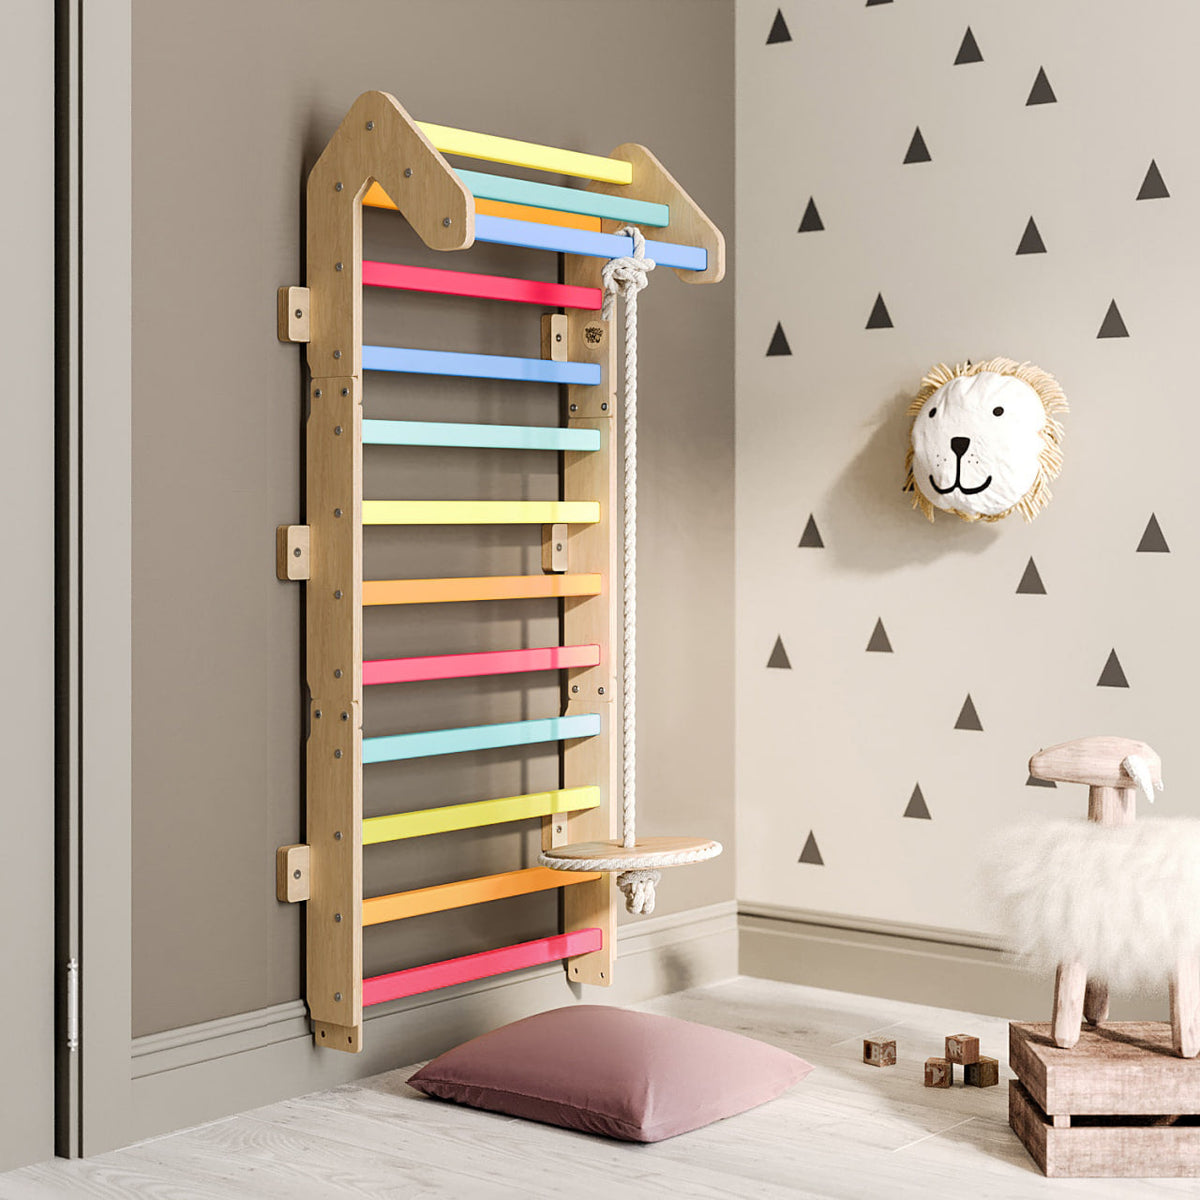 Wall bars BusyKids 2-in-1 - light